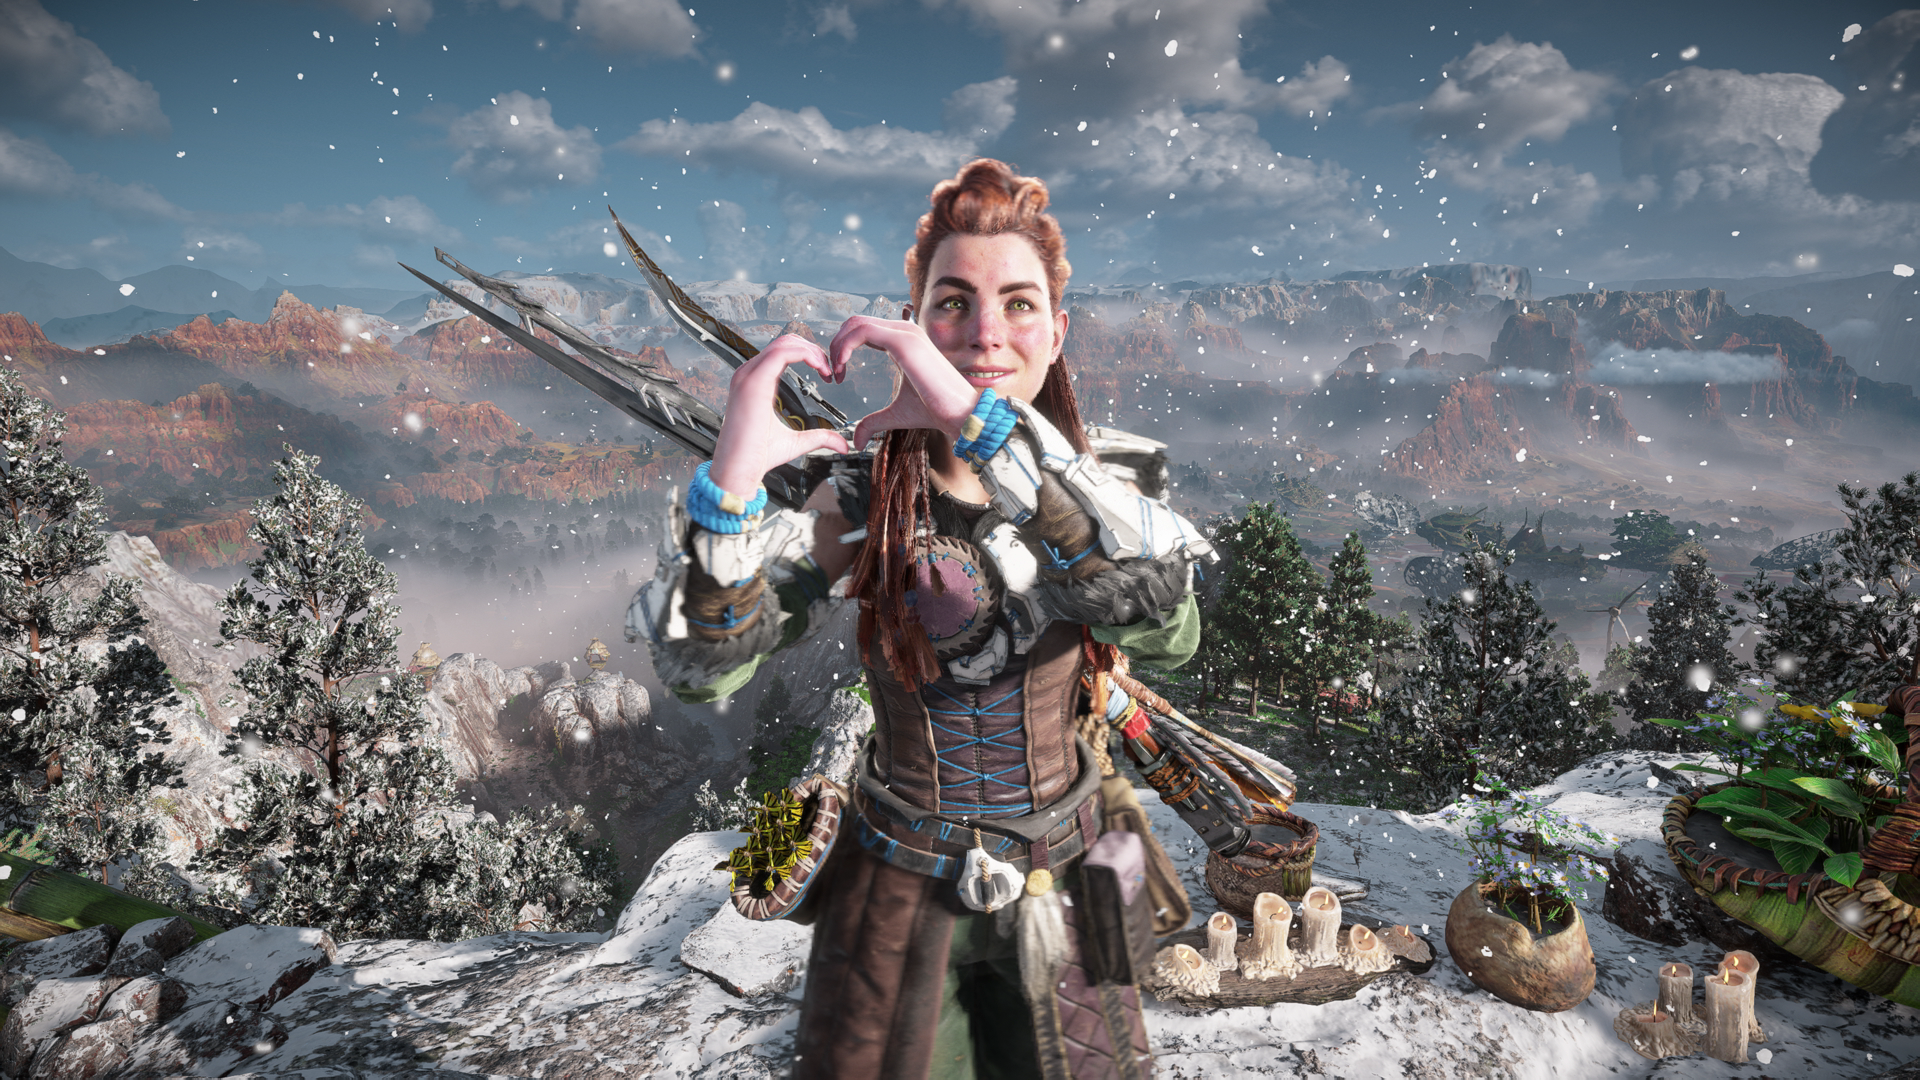 Aloy smiles at the camera, making a heart shape with her hands, in a snowy landscape in Horizon Forbidden West